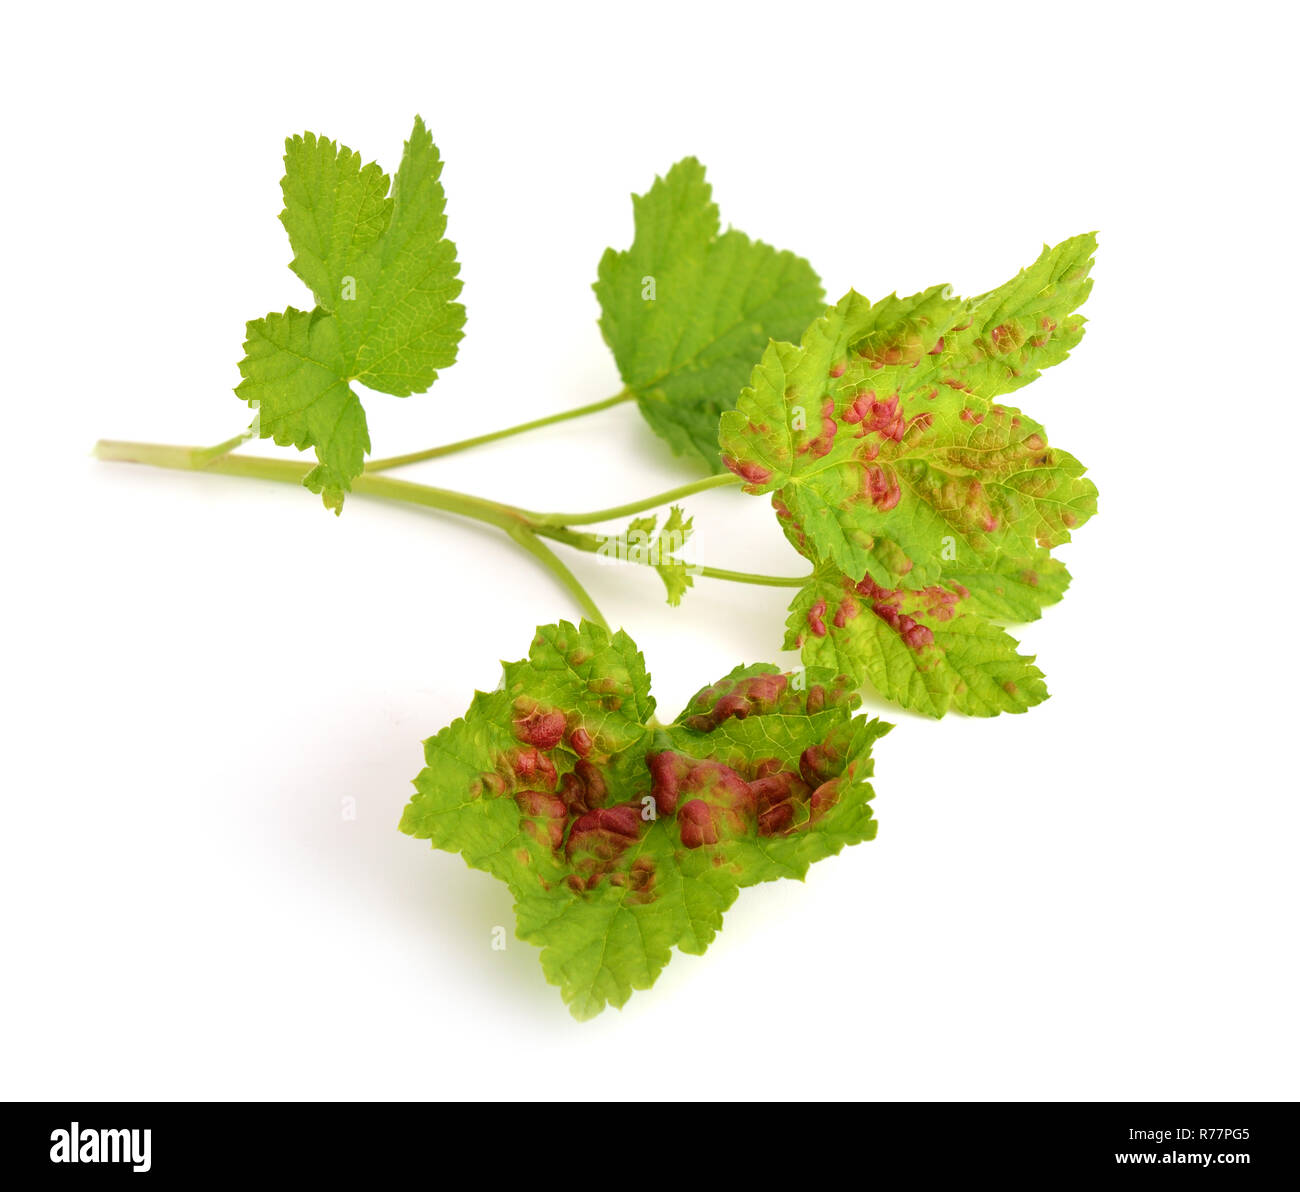 Illness leaves of a gooseberry. Isolated. Stock Photo